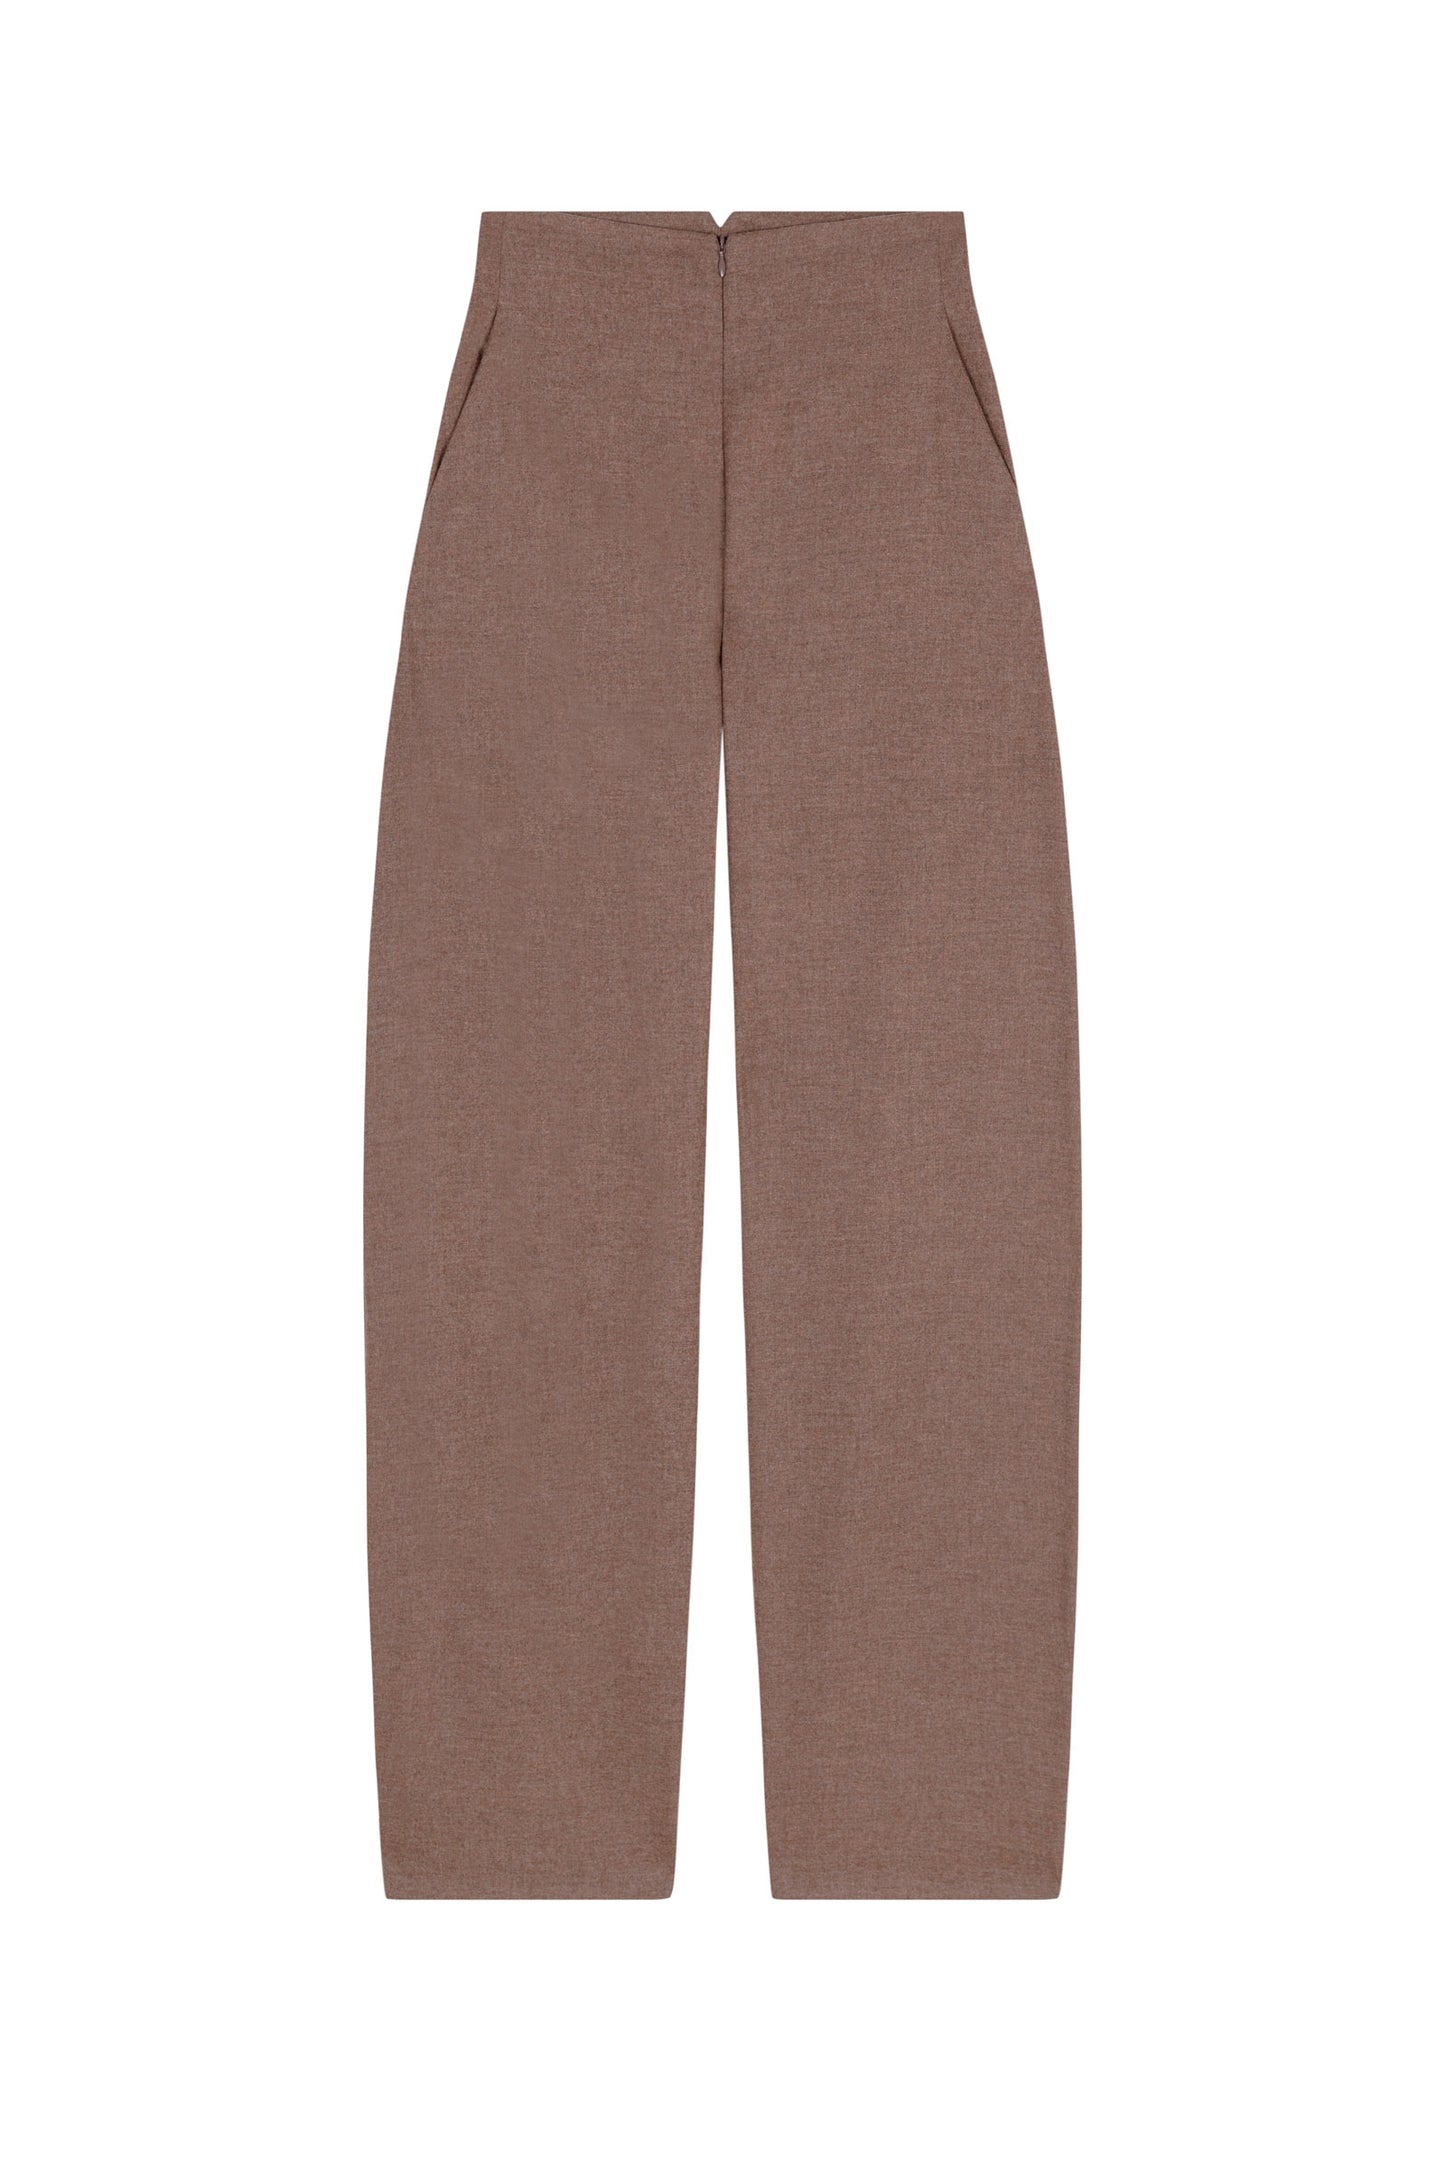 Lanna, cappuccino virgin wool and cashmere pants